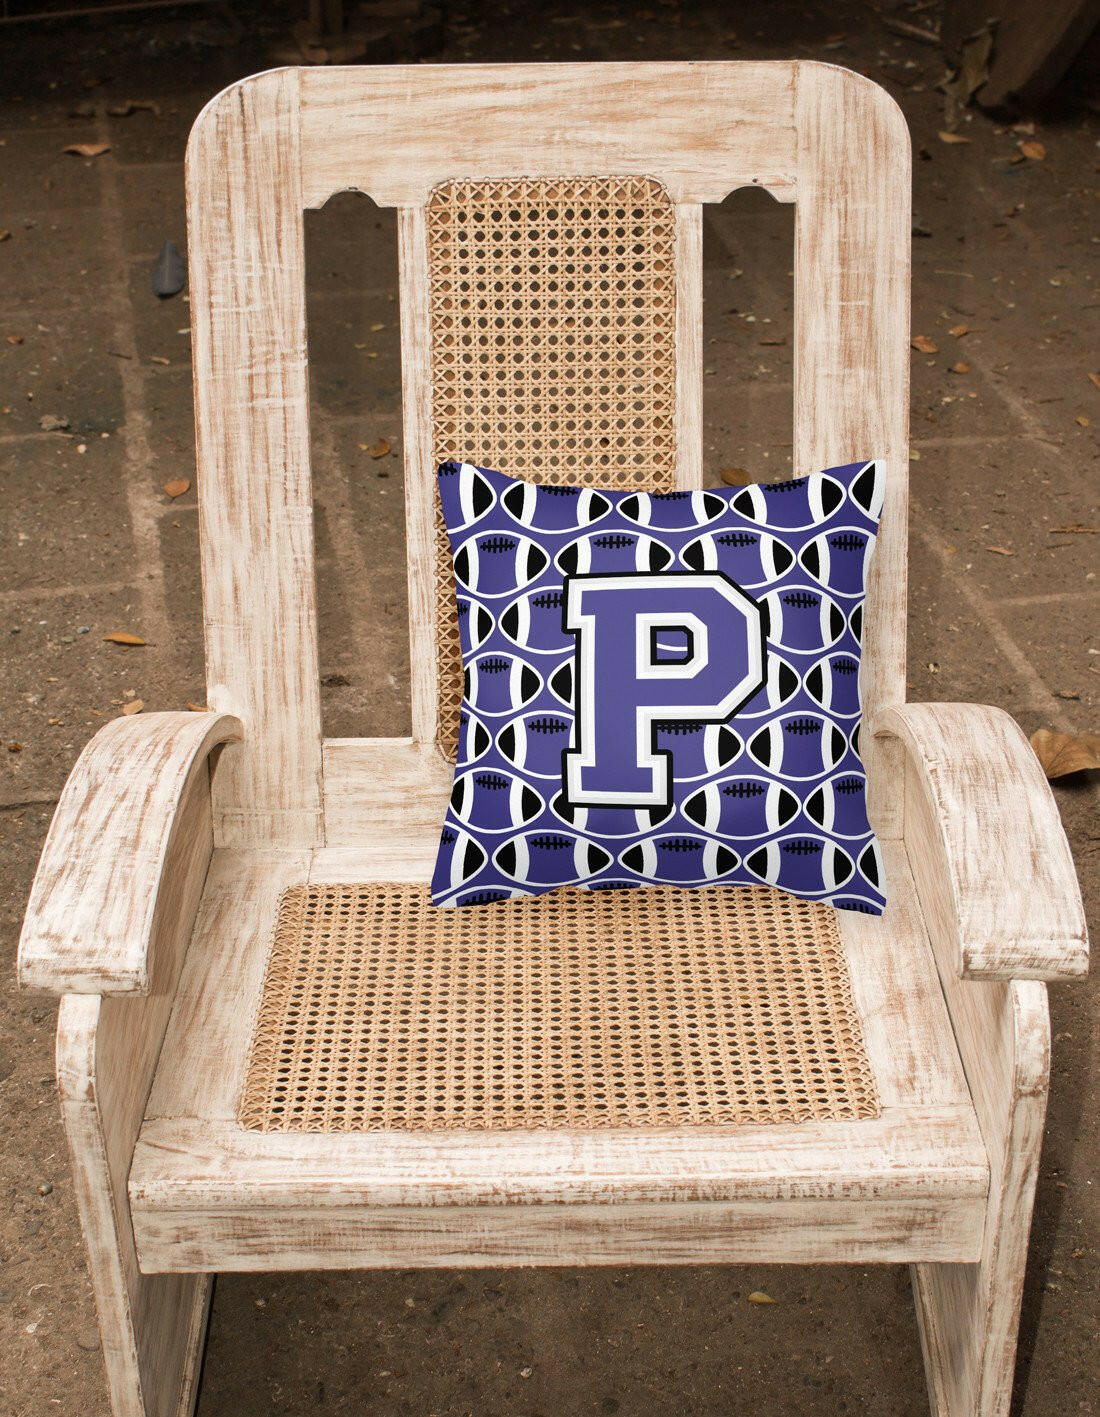 Letter P Football Purple and White Fabric Decorative Pillow CJ1068-PPW1414 by Caroline's Treasures